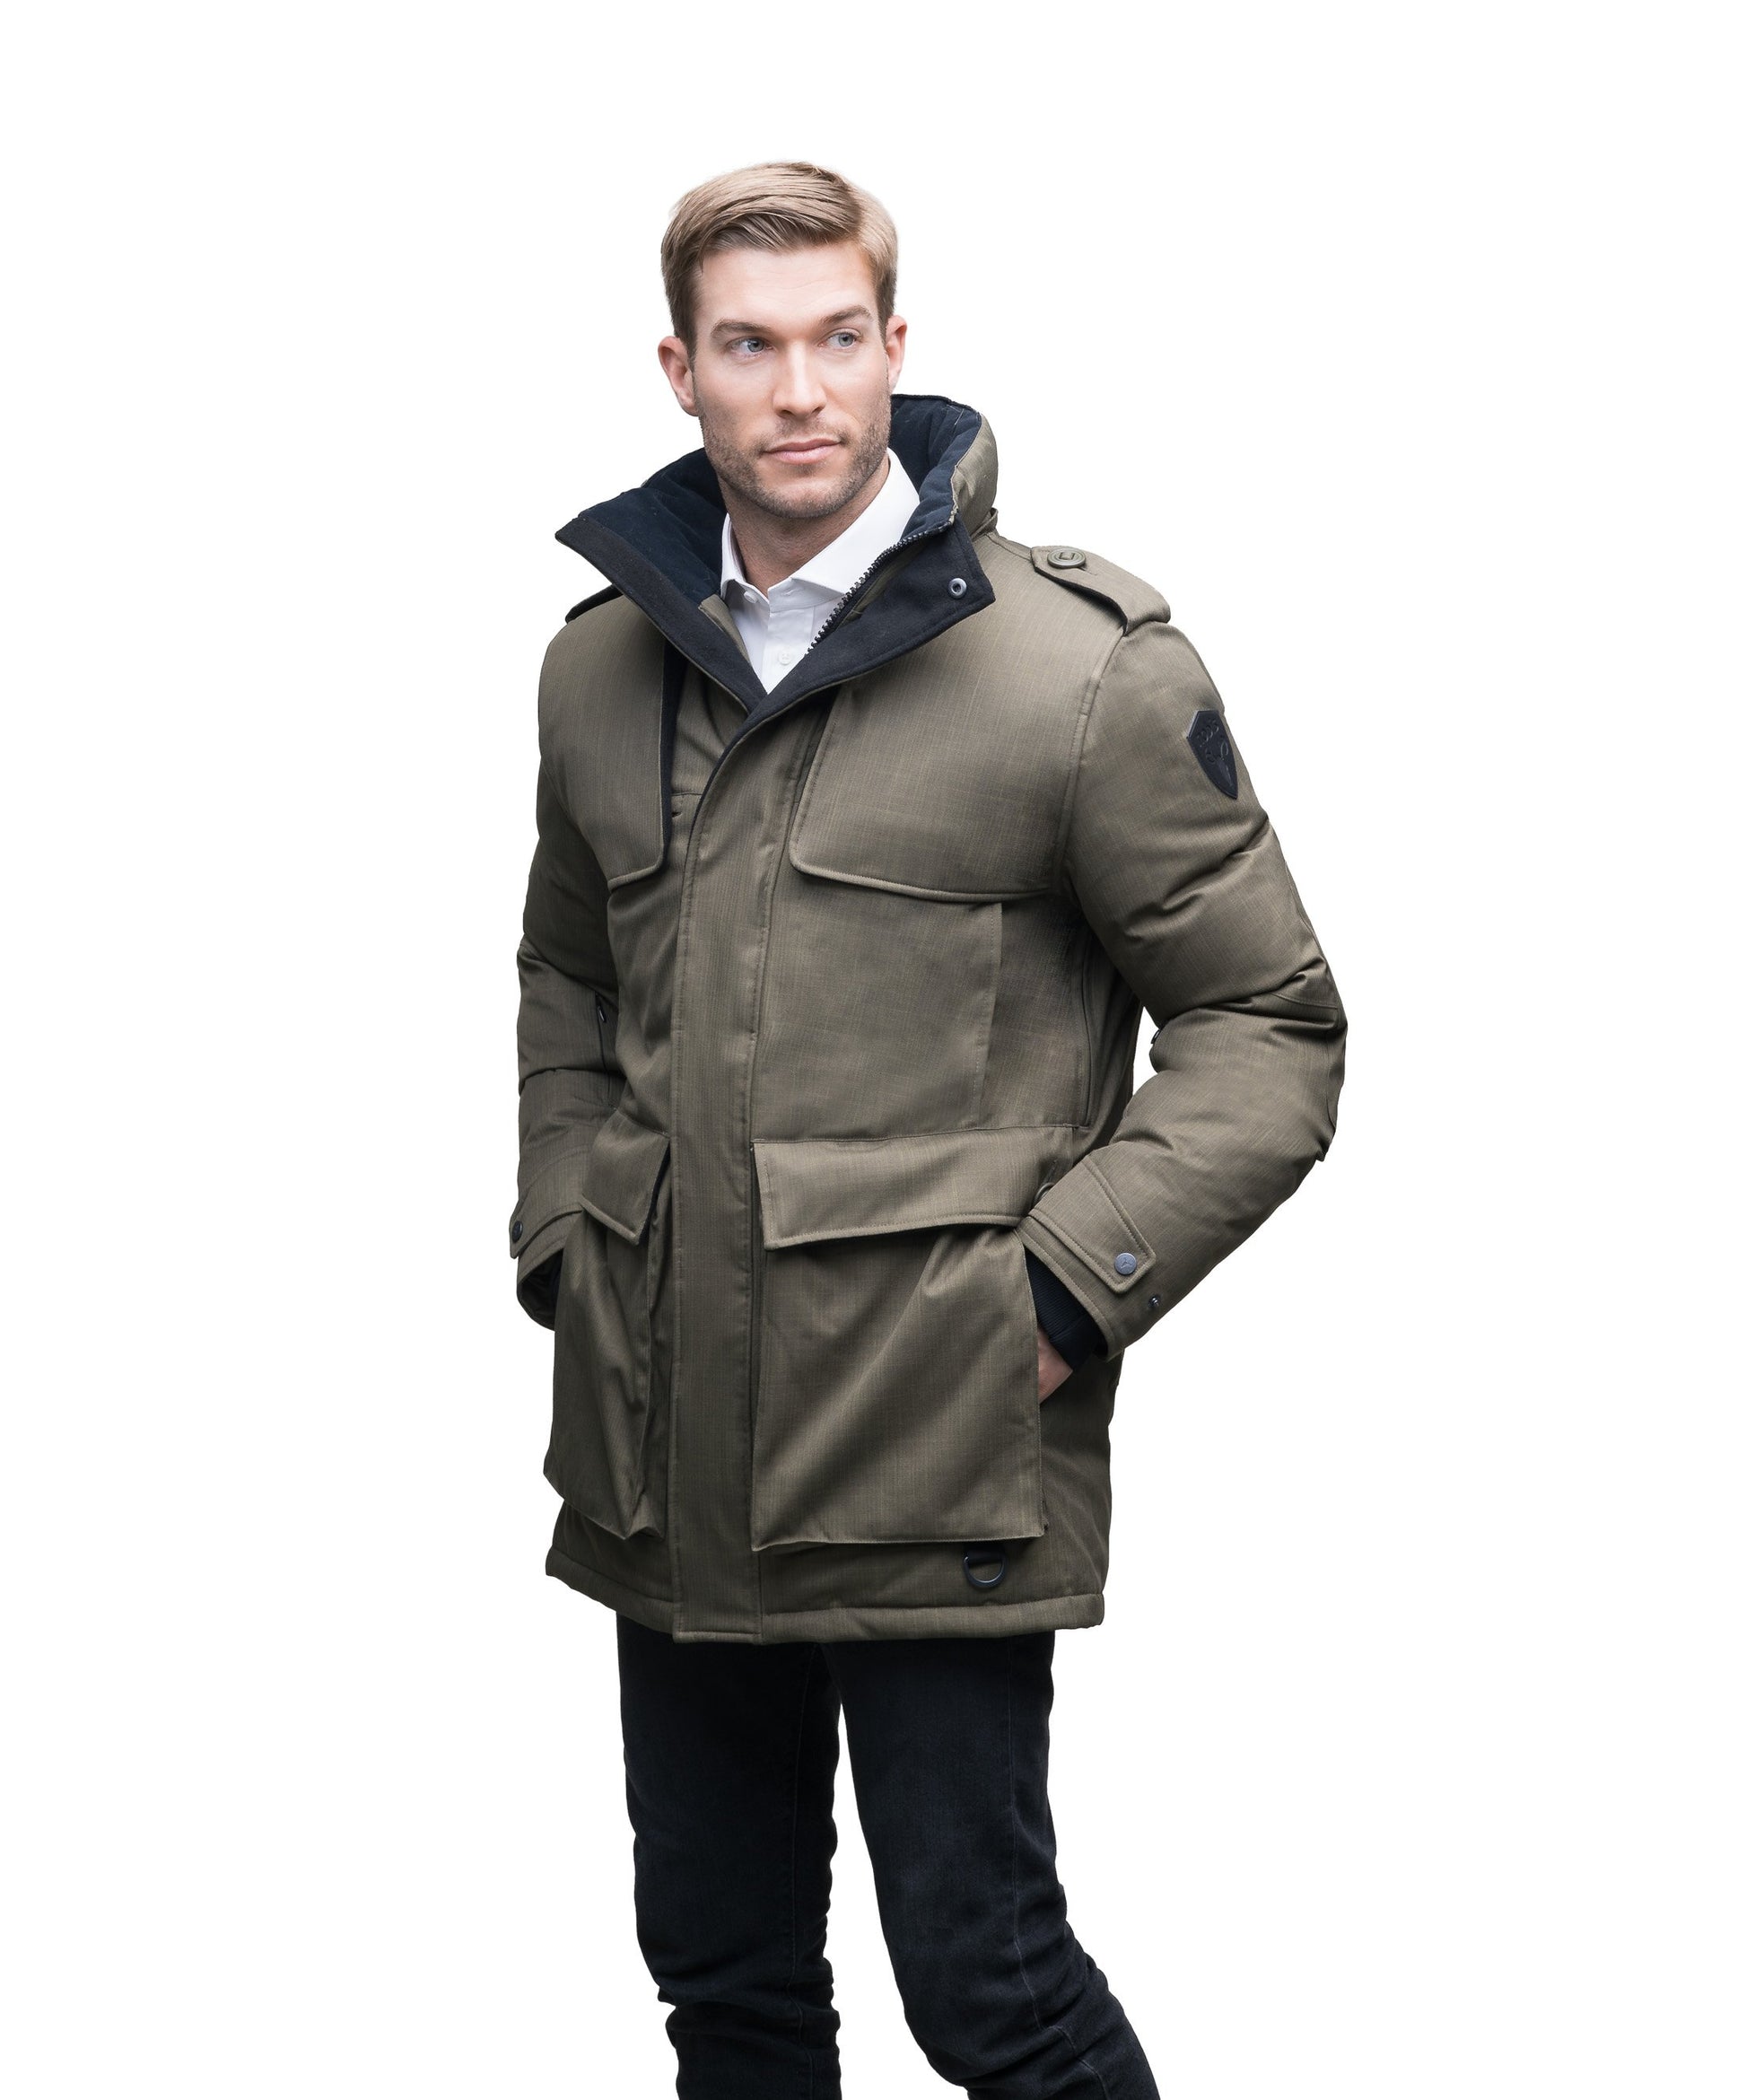 Men's parka with storm patch detail and two patch pockets in CH Steel Grey